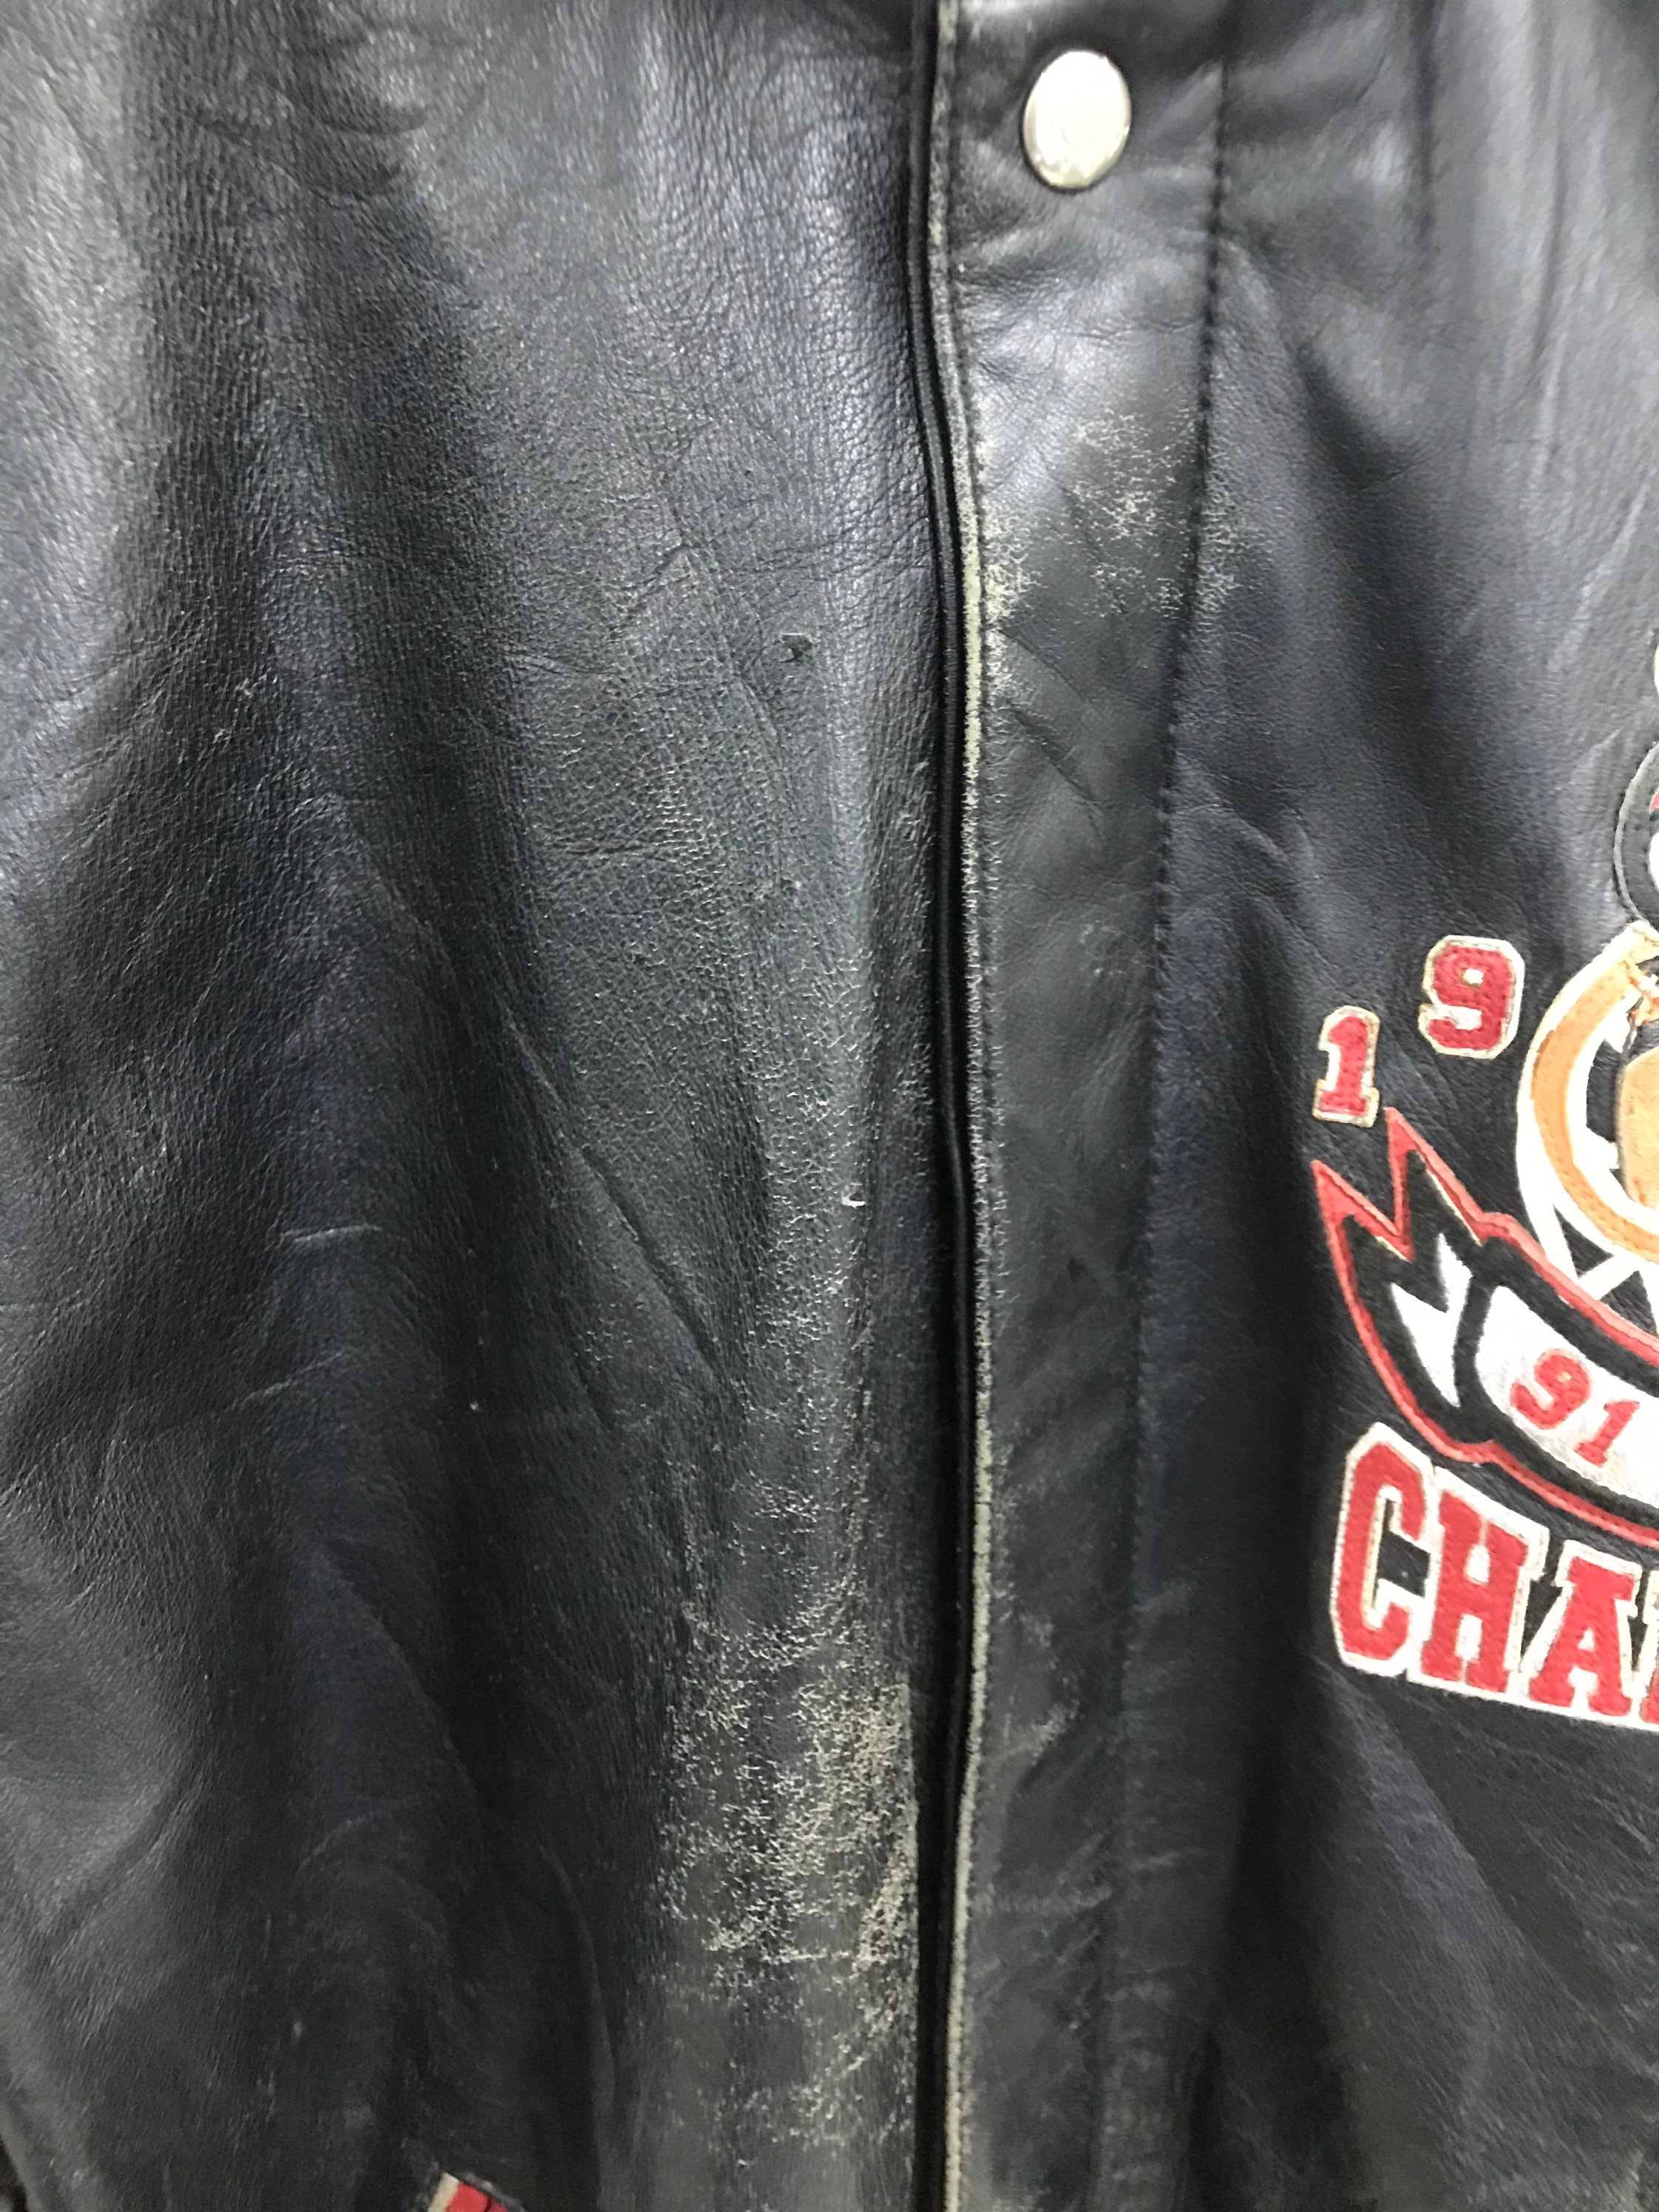 Vintage 1996 Chicago Bulls NBA Champions Leather Jacket..size L..made in  USA 